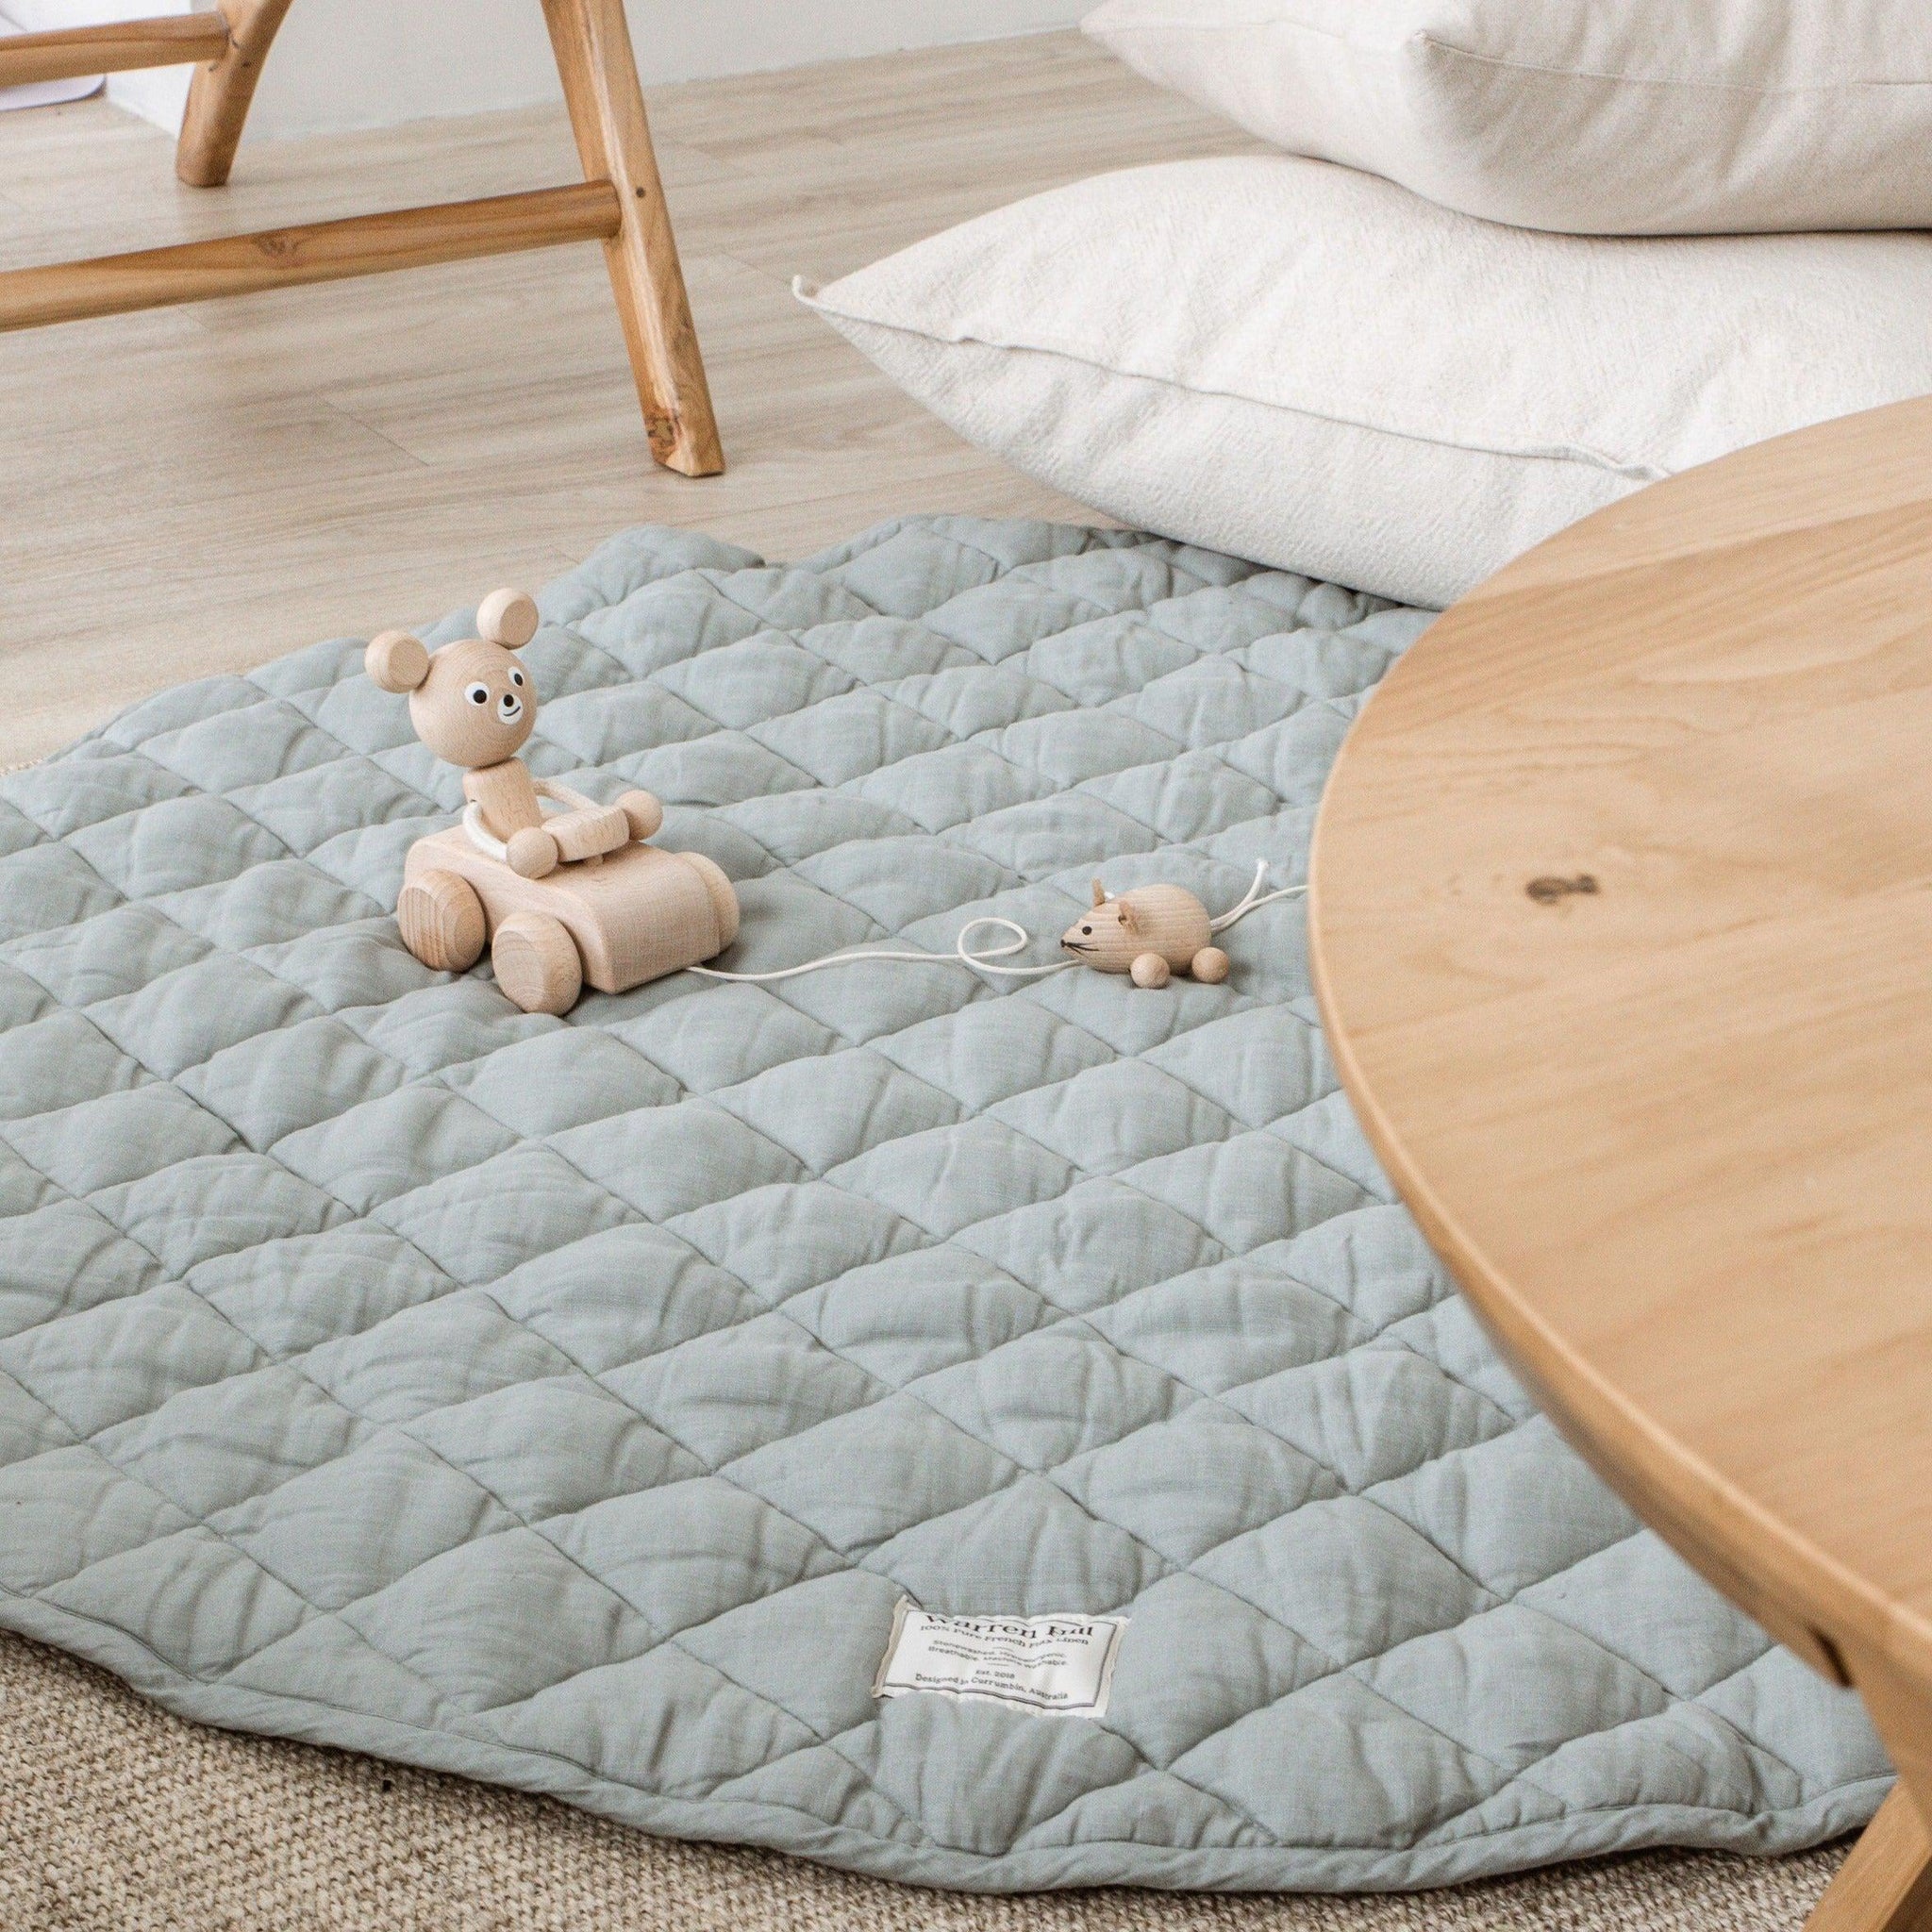 Our Warren Hill 'Aqua' baby play mat is made from 100% Pure French Flax Linen with a soft, polyester filling that provides cushion and support for your child's delicate skin. Our linen is stonewashed giving it that beautiful soft, worn-in feel from the first time your child plays on it. Linen is naturally hypoallergenic, extremely durable, and one of the most sustainable materials to harvest and produce in the textile industry.